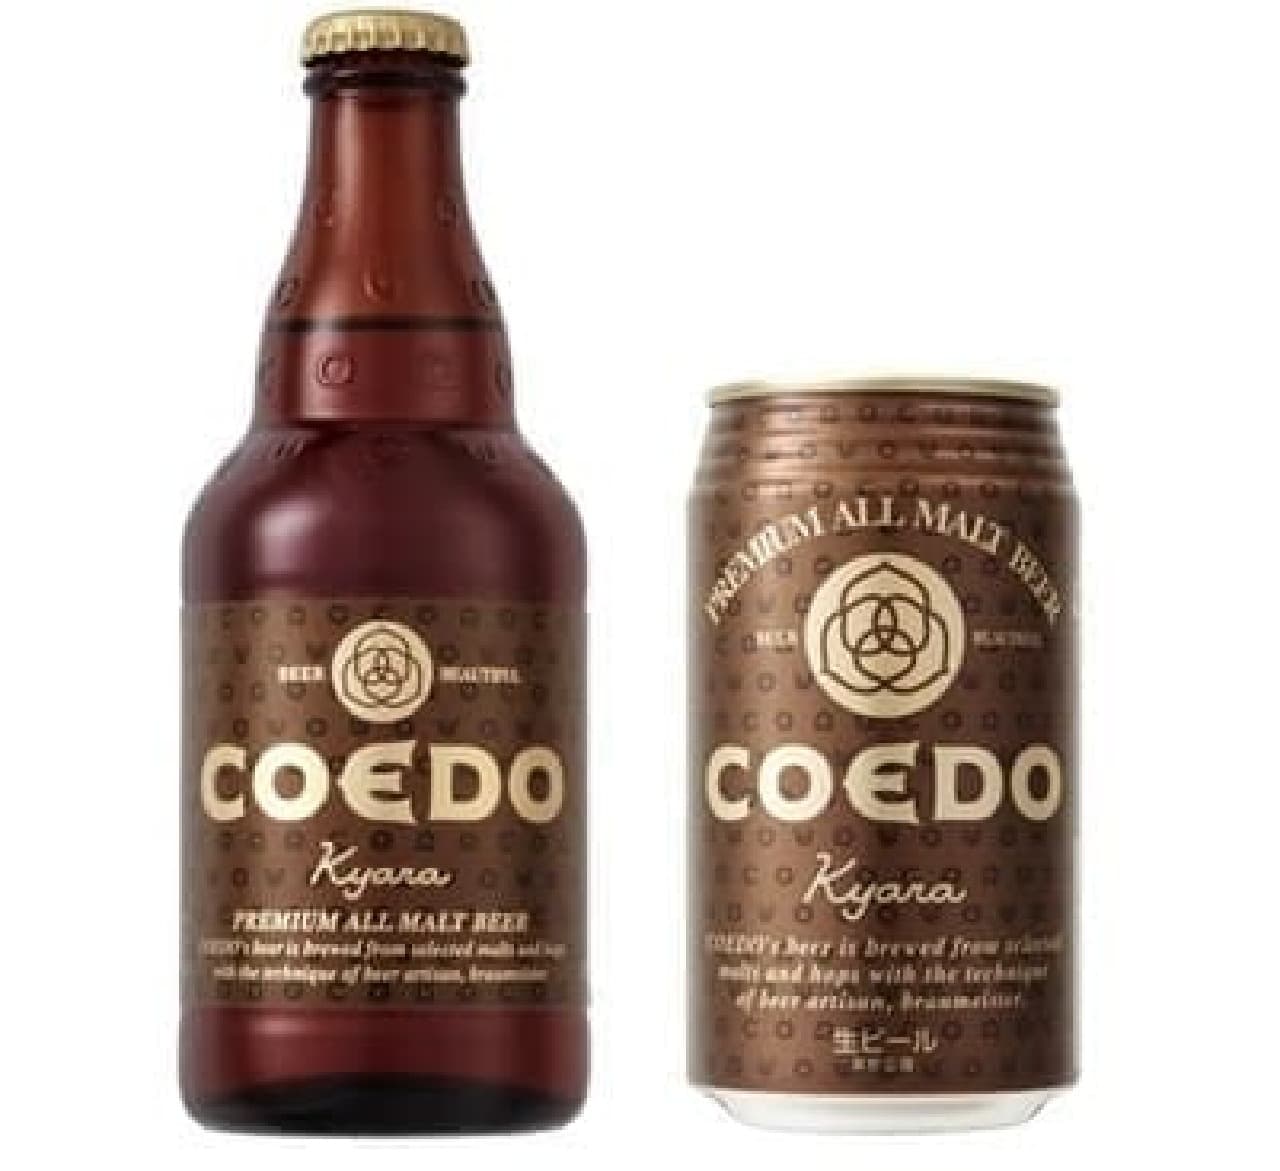 All-you-can-drink "Coed Beer"!